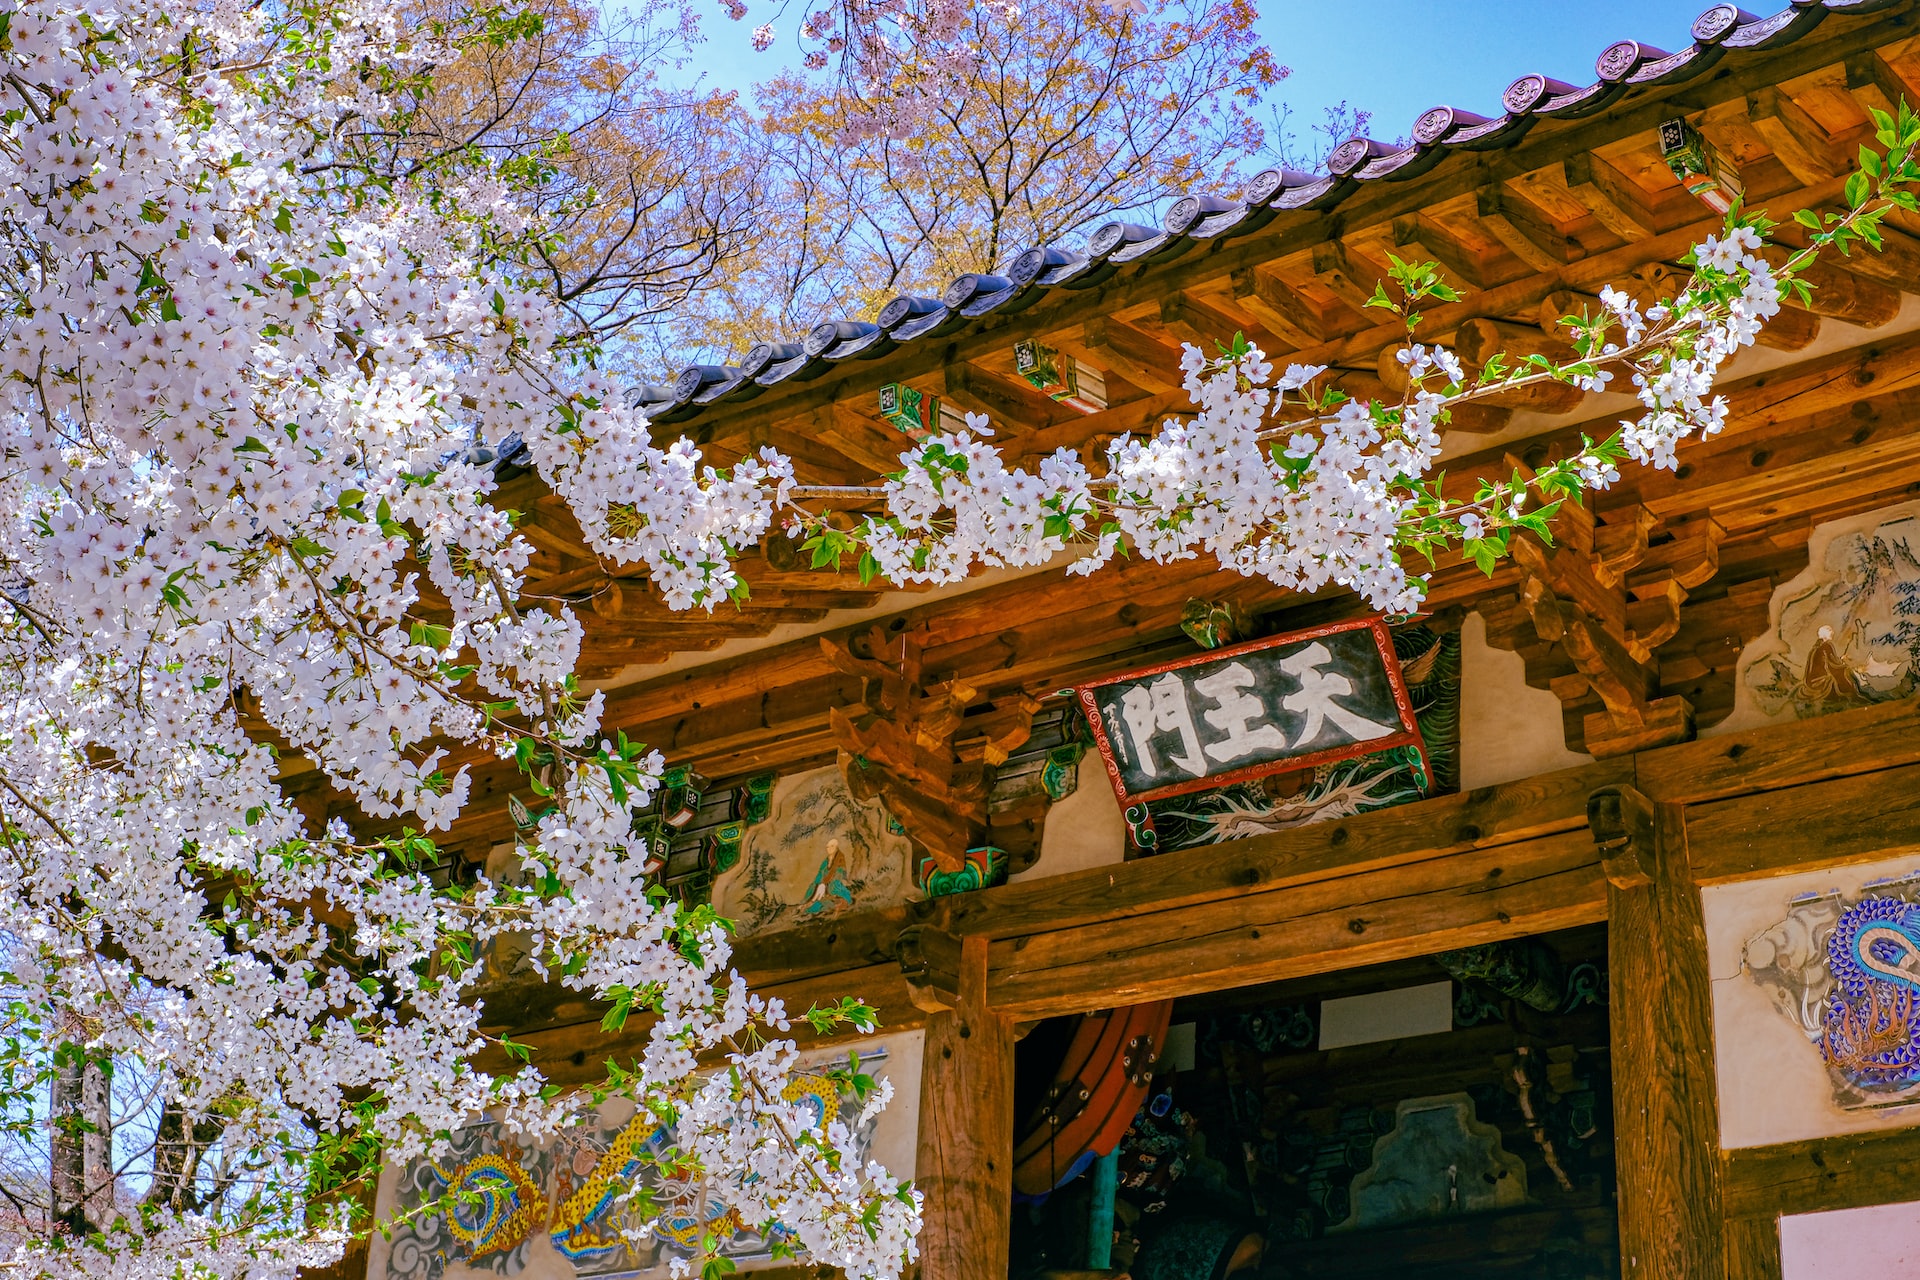 A cherry blossom tree next to a temple in Korea.